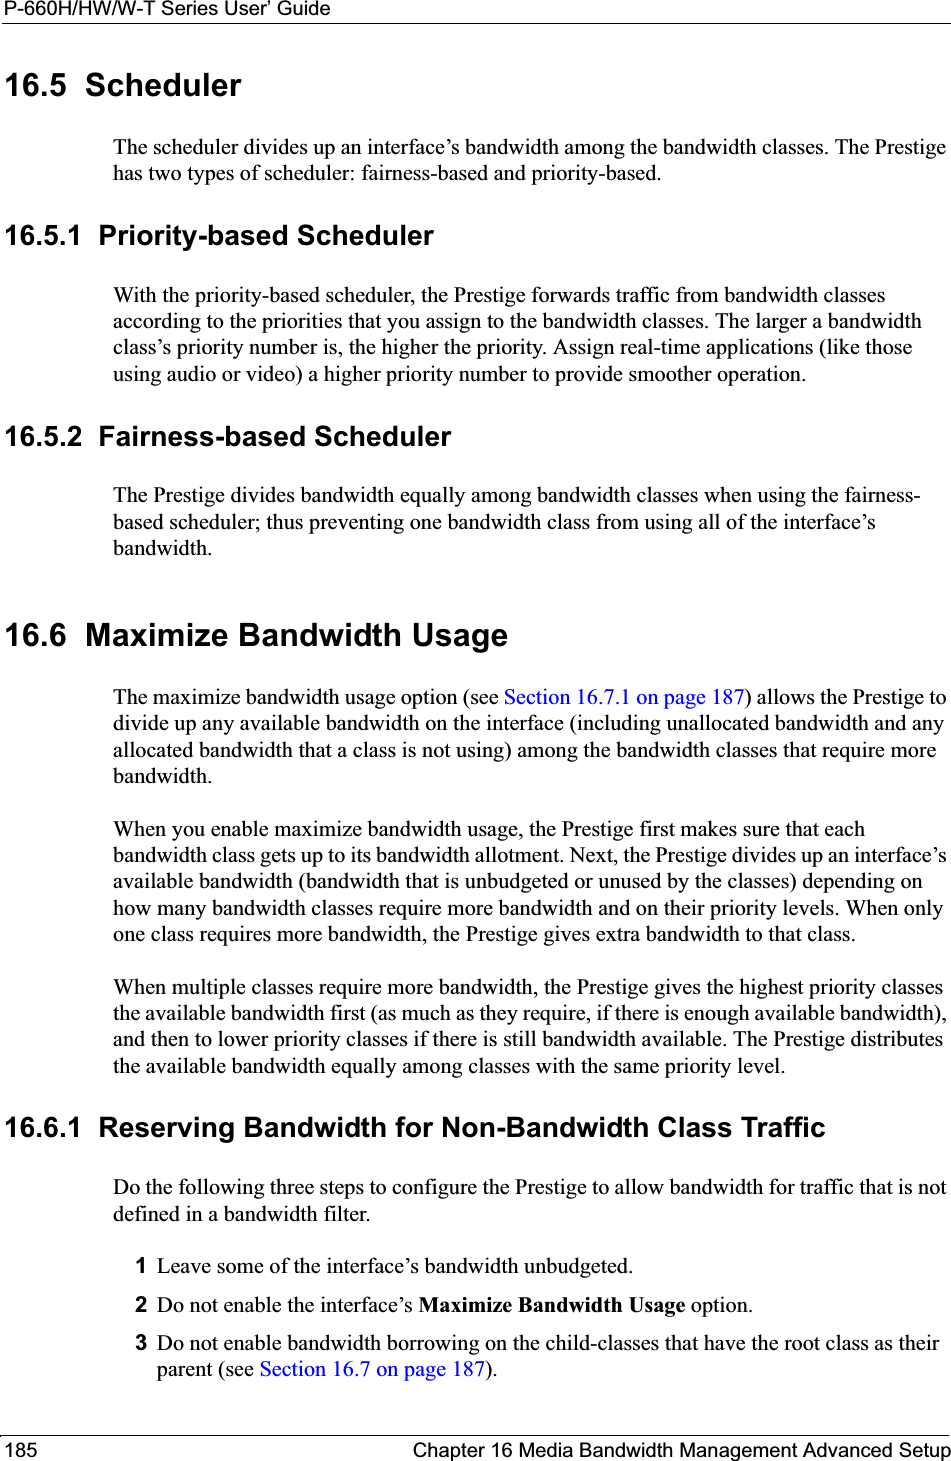 P-660H/HW/W-T Series User’ Guide185 Chapter 16 Media Bandwidth Management Advanced Setup16.5  SchedulerThe scheduler divides up an interface’s bandwidth among the bandwidth classes. The Prestige has two types of scheduler: fairness-based and priority-based. 16.5.1  Priority-based SchedulerWith the priority-based scheduler, the Prestige forwards traffic from bandwidth classes according to the priorities that you assign to the bandwidth classes. The larger a bandwidth class’s priority number is, the higher the priority. Assign real-time applications (like those using audio or video) a higher priority number to provide smoother operation.16.5.2  Fairness-based SchedulerThe Prestige divides bandwidth equally among bandwidth classes when using the fairness-based scheduler; thus preventing one bandwidth class from using all of the interface’s bandwidth. 16.6  Maximize Bandwidth UsageThe maximize bandwidth usage option (see Section 16.7.1 on page 187) allows the Prestige to divide up any available bandwidth on the interface (including unallocated bandwidth and any allocated bandwidth that a class is not using) among the bandwidth classes that require more bandwidth. When you enable maximize bandwidth usage, the Prestige first makes sure that each bandwidth class gets up to its bandwidth allotment. Next, the Prestige divides up an interface’s available bandwidth (bandwidth that is unbudgeted or unused by the classes) depending on how many bandwidth classes require more bandwidth and on their priority levels. When only one class requires more bandwidth, the Prestige gives extra bandwidth to that class. When multiple classes require more bandwidth, the Prestige gives the highest priority classes the available bandwidth first (as much as they require, if there is enough available bandwidth), and then to lower priority classes if there is still bandwidth available. The Prestige distributes the available bandwidth equally among classes with the same priority level. 16.6.1  Reserving Bandwidth for Non-Bandwidth Class TrafficDo the following three steps to configure the Prestige to allow bandwidth for traffic that is not defined in a bandwidth filter.1Leave some of the interface’s bandwidth unbudgeted.2Do not enable the interface’s Maximize Bandwidth Usage option.3Do not enable bandwidth borrowing on the child-classes that have the root class as their parent (see Section 16.7 on page 187).